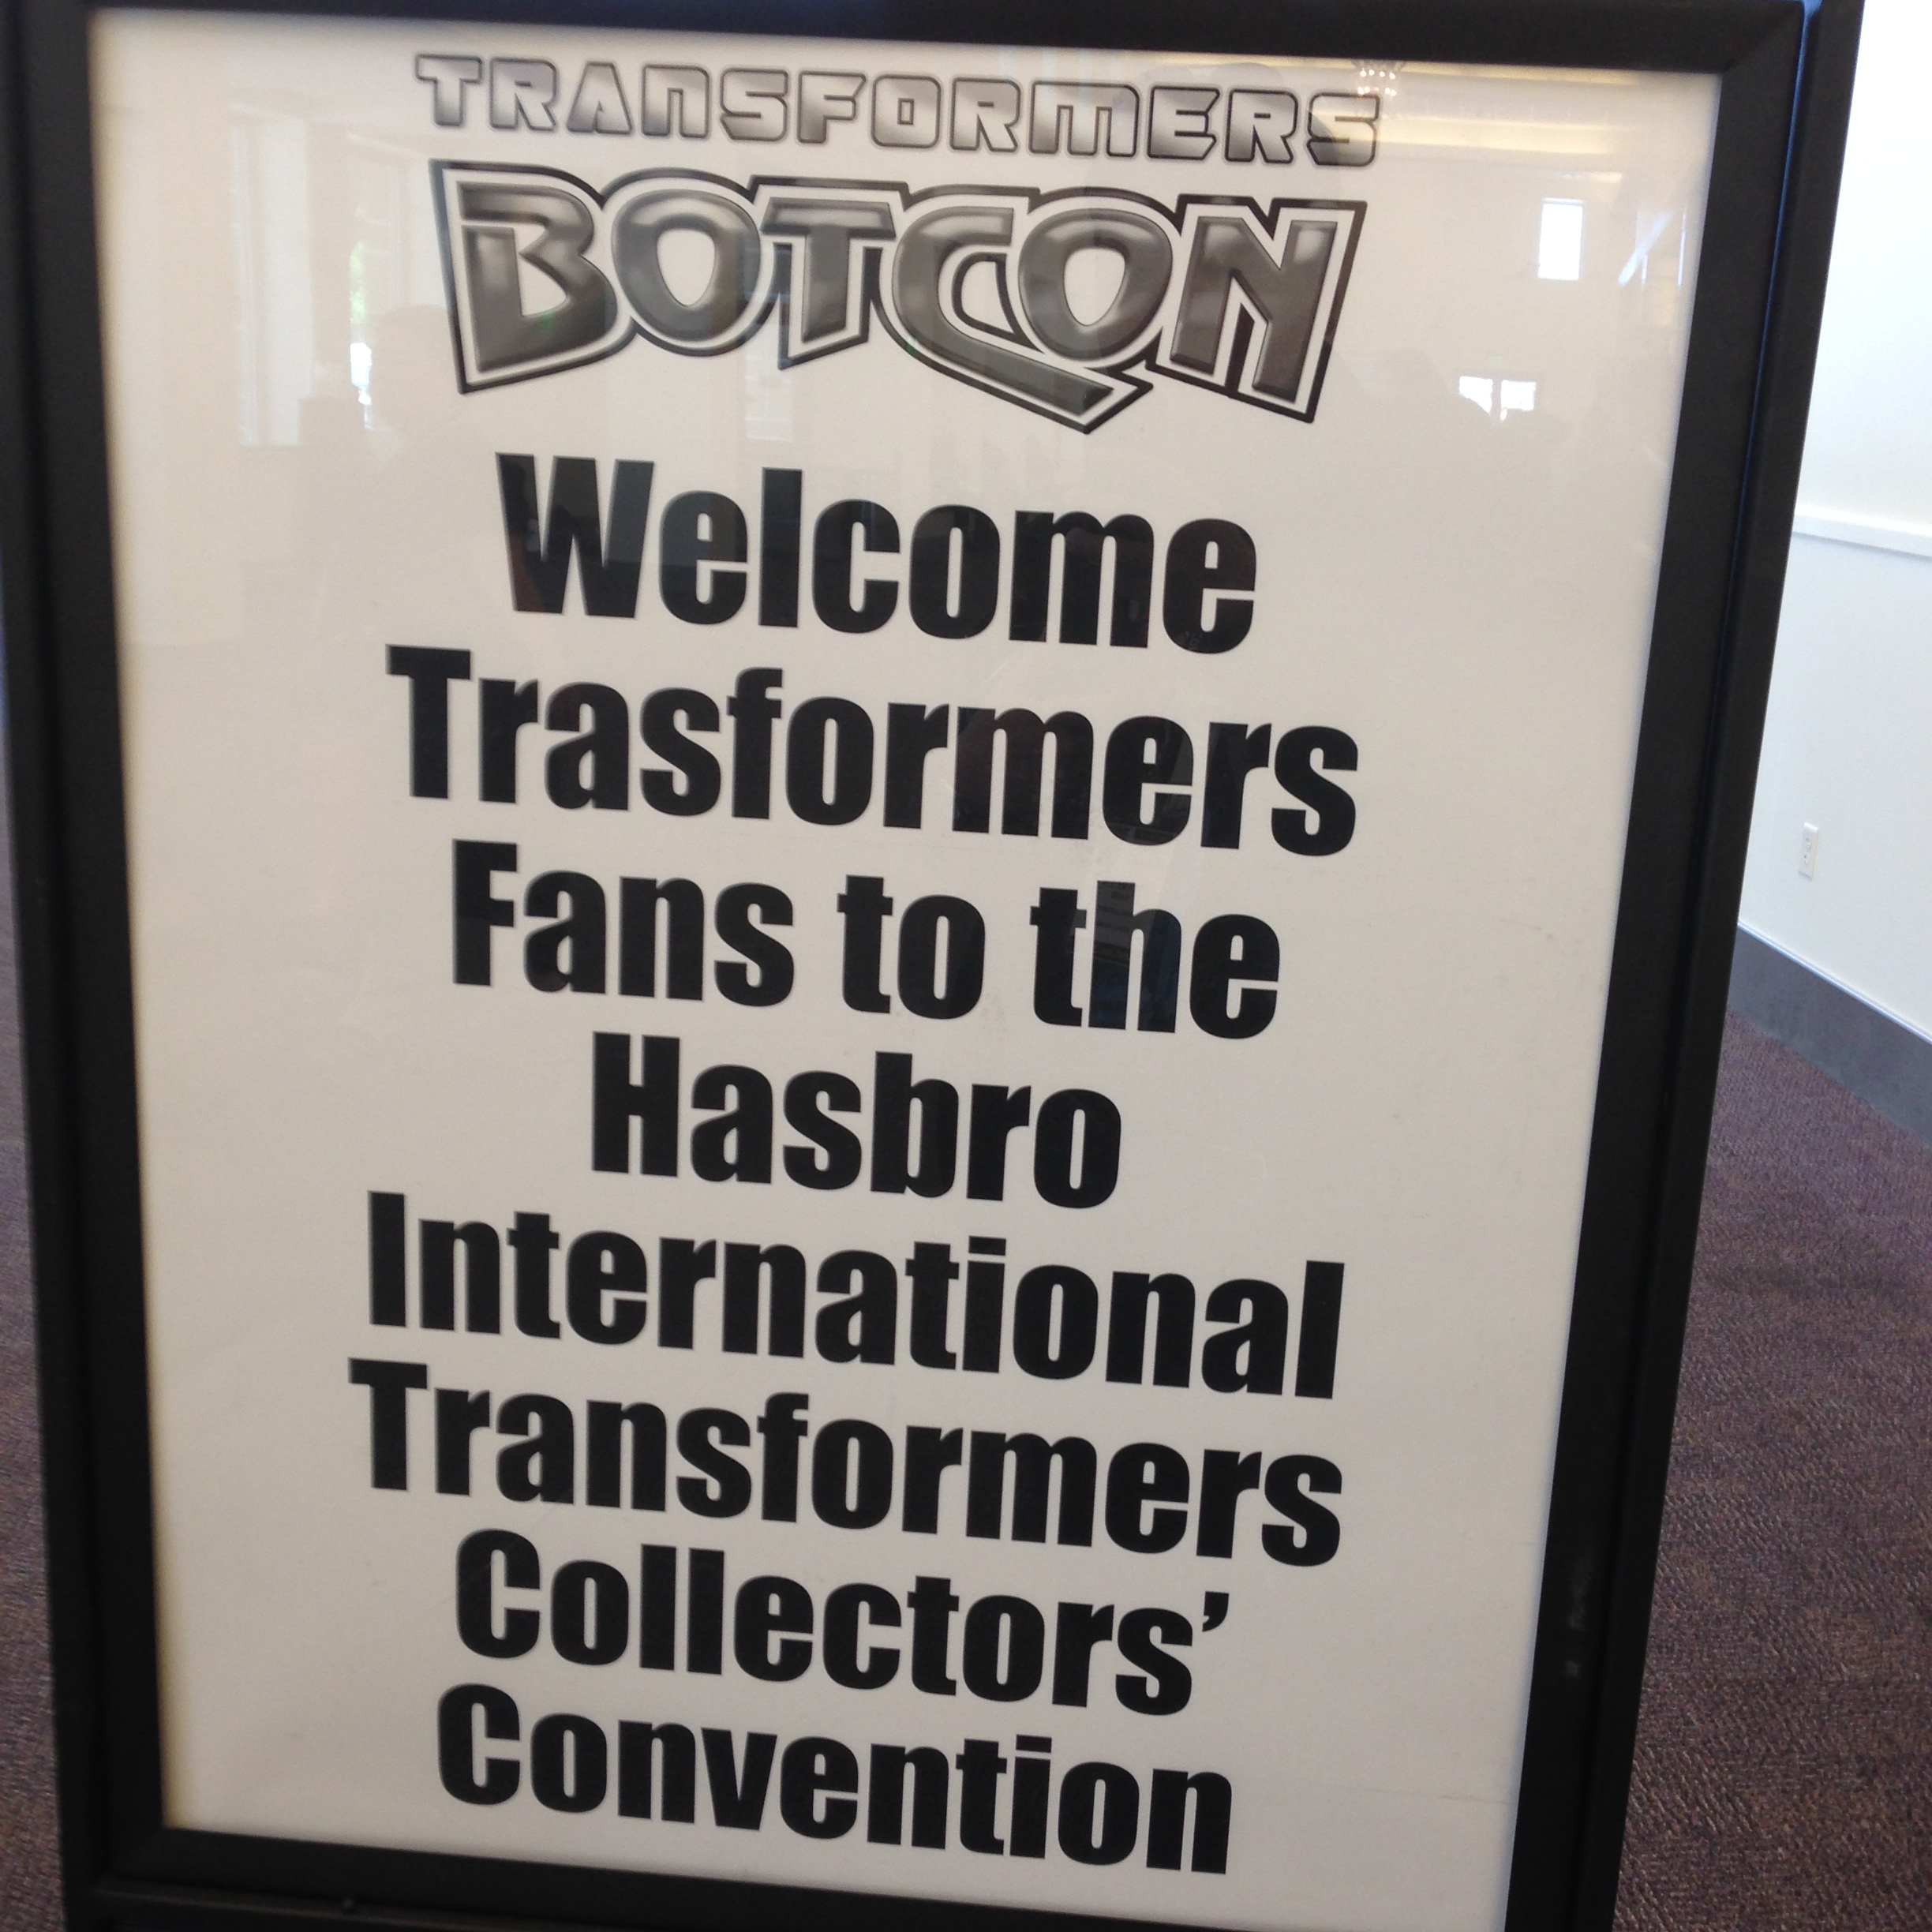 The welcome sign as we depart. (Botcon Day 4)